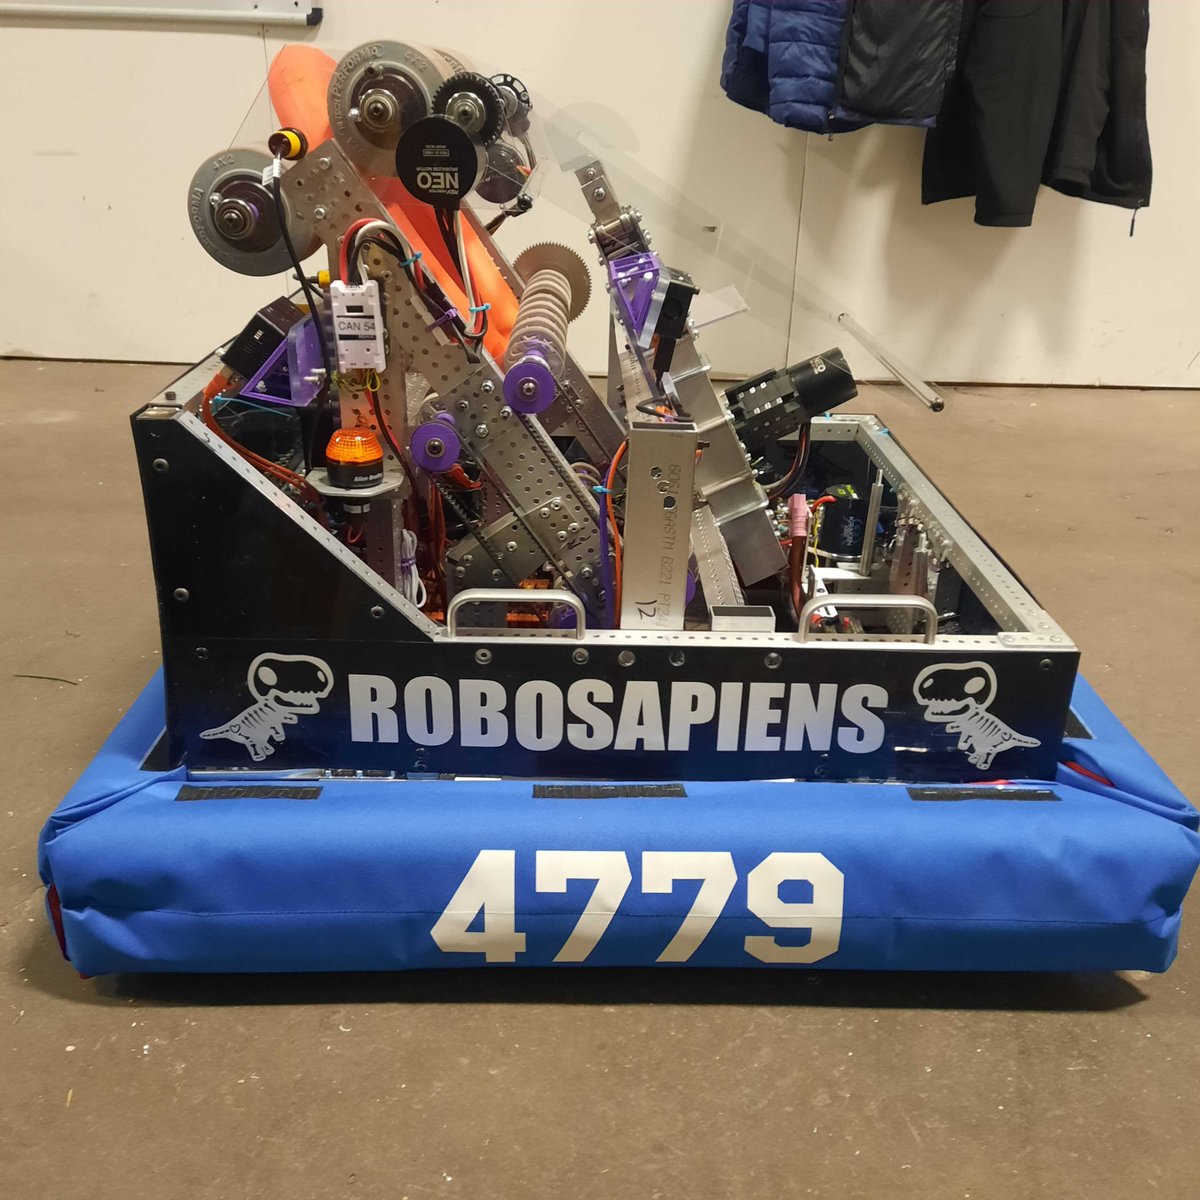 Best of luck to the Robosapiens as they kick off their robotics season today at Kettering University! The students will be competing against a field of forty teams this weekend. Watch the livestream at: twitch.tv/firstinspires34 Look for Team #4779.